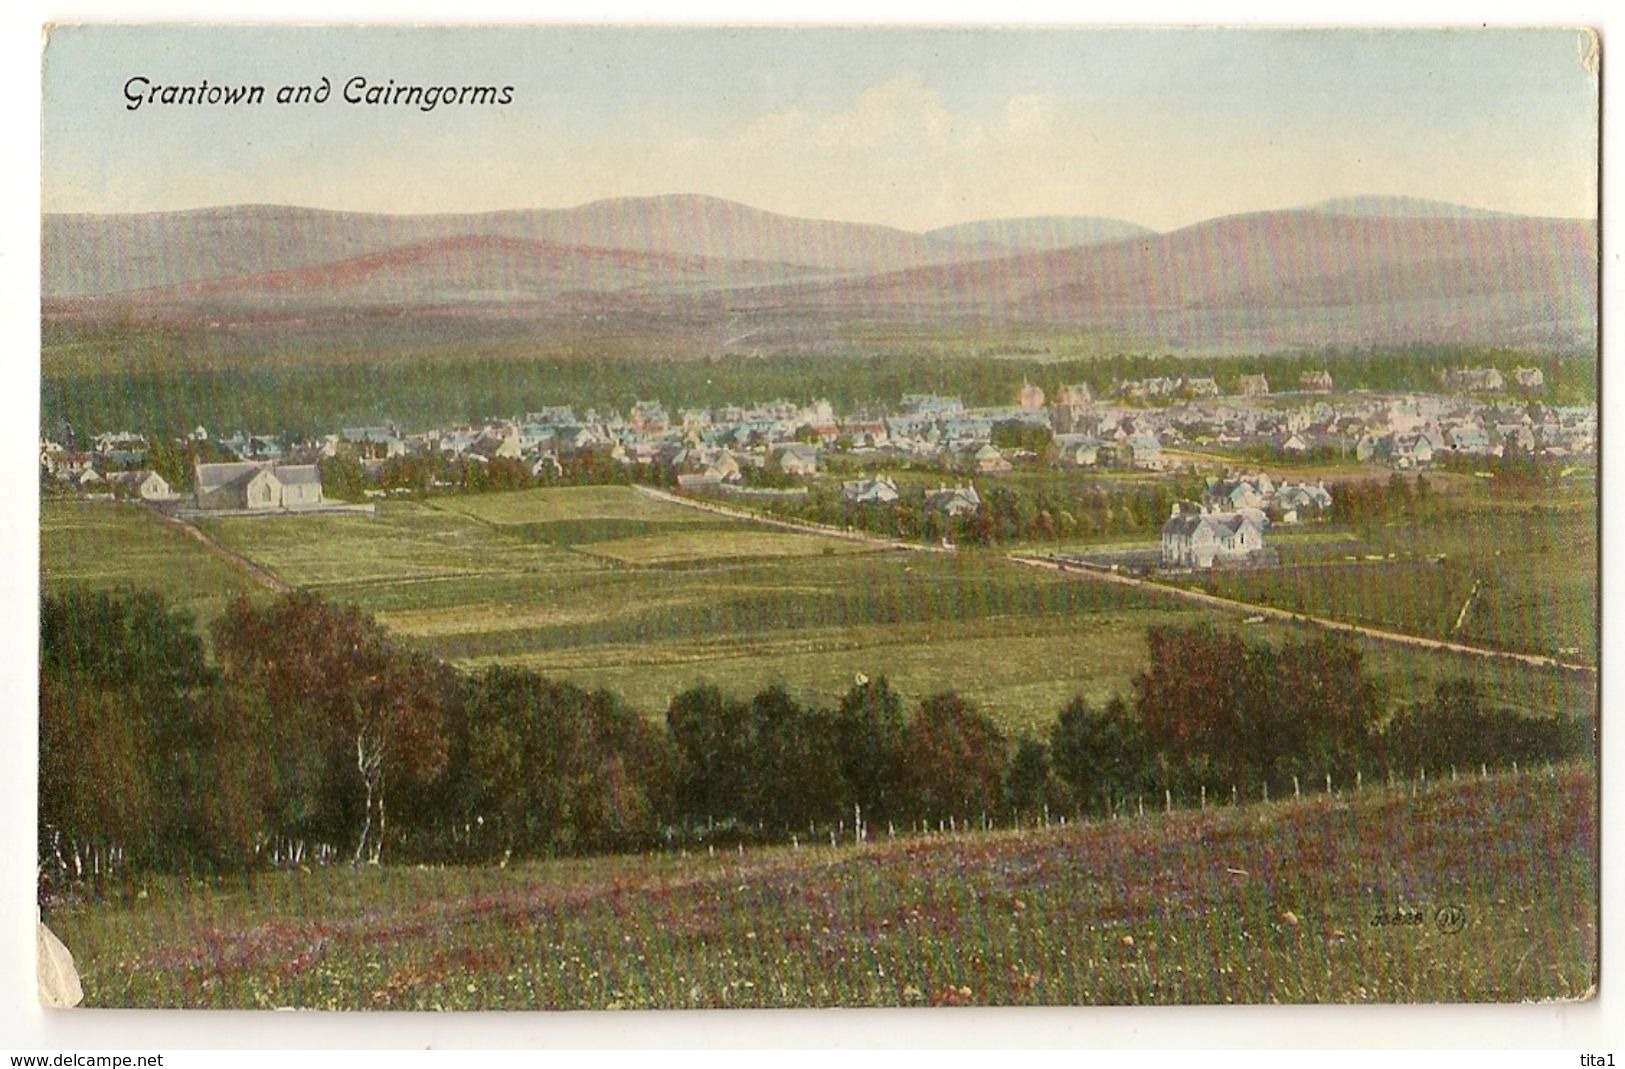 UK 295 - Grantown And Cairngorms - Moray